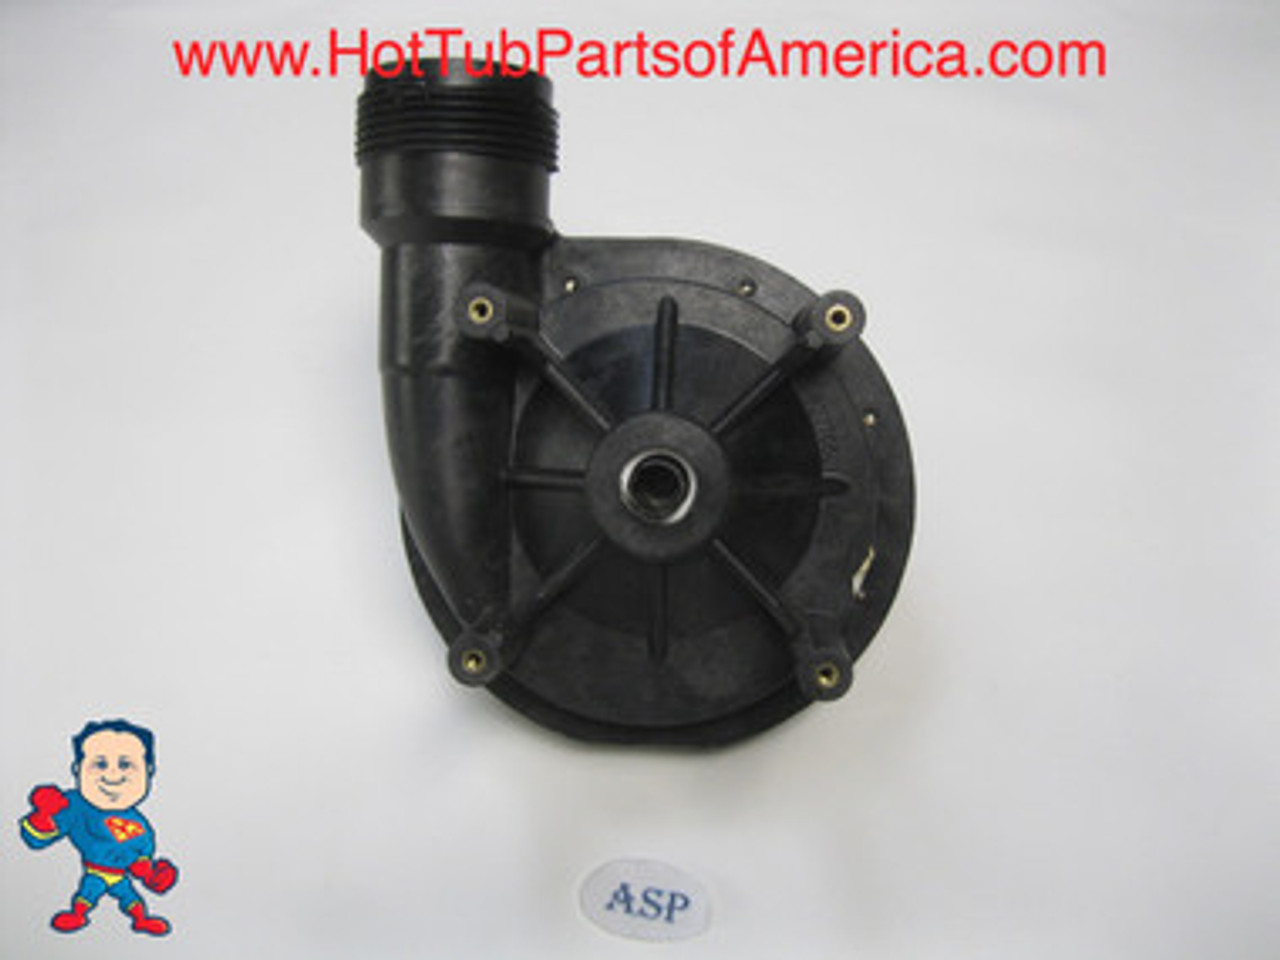 Wet End, Aqua-Flo, FMHP, 2.0HP, 1-1/2", 48 frame, 10.0A/230V, 16A/115v
This is a 48 Frame Wet End and the Thru-Bolts are about 5 1/4" apart in a cross pattern and 3 5/8" Side to Side....Also the bolt heads on the thru-bolts are 1/4" on a 48 frame motor..IF your bolt heads are 5/16" you have a 56fr motor and this wet end will not work..